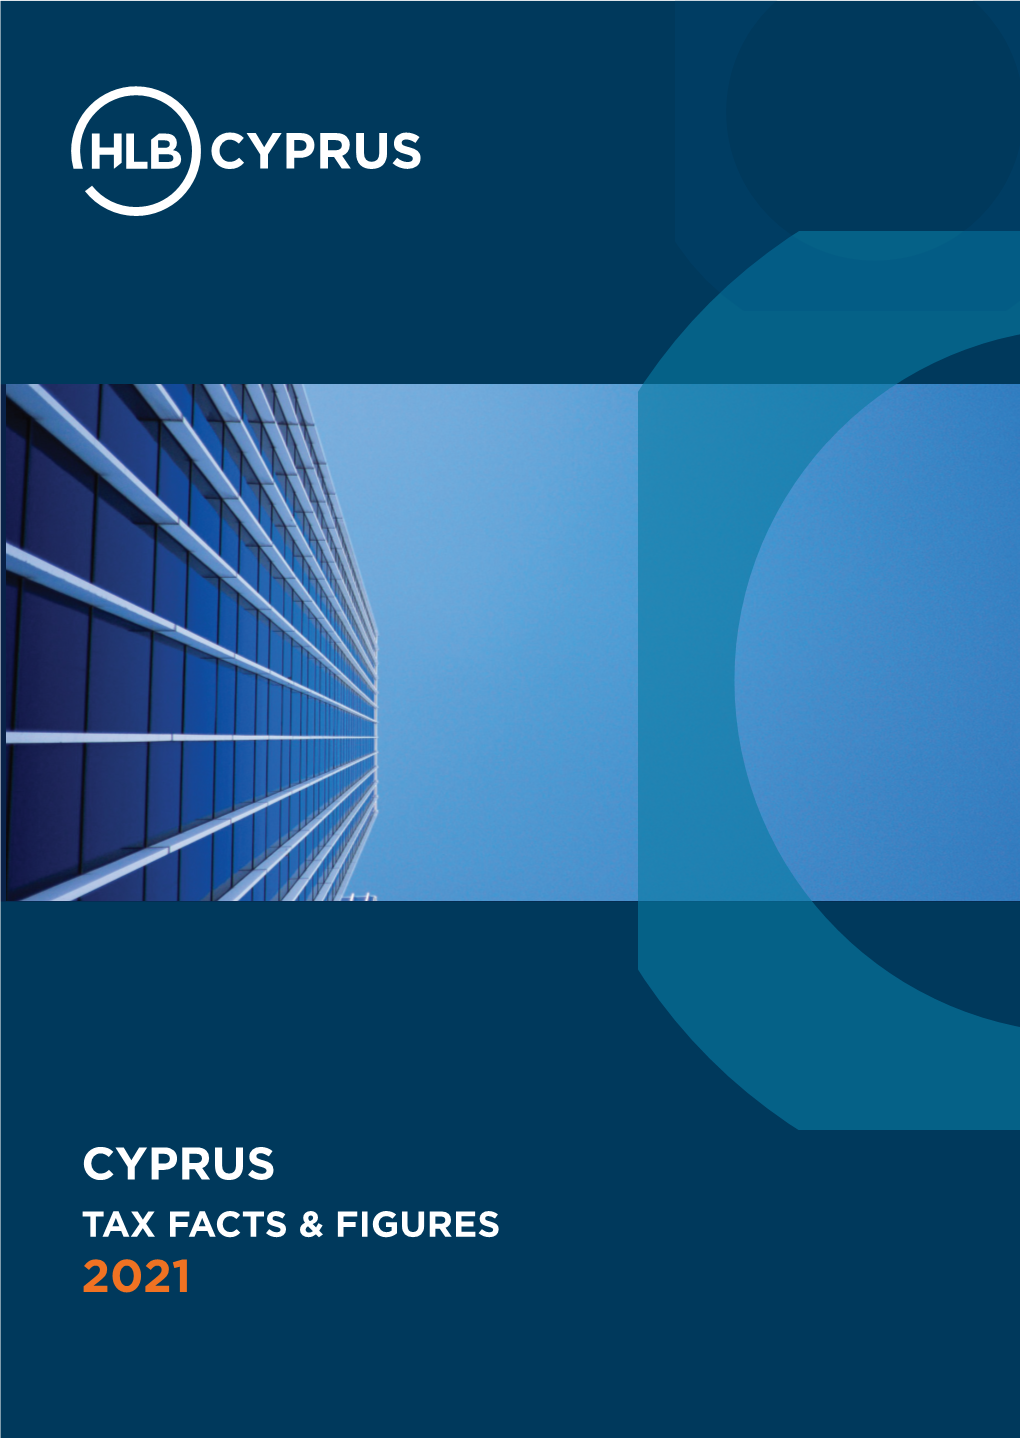 HLB Cyprus Limited Is a Principal Member of International, the Global Advisory and Accounting Network